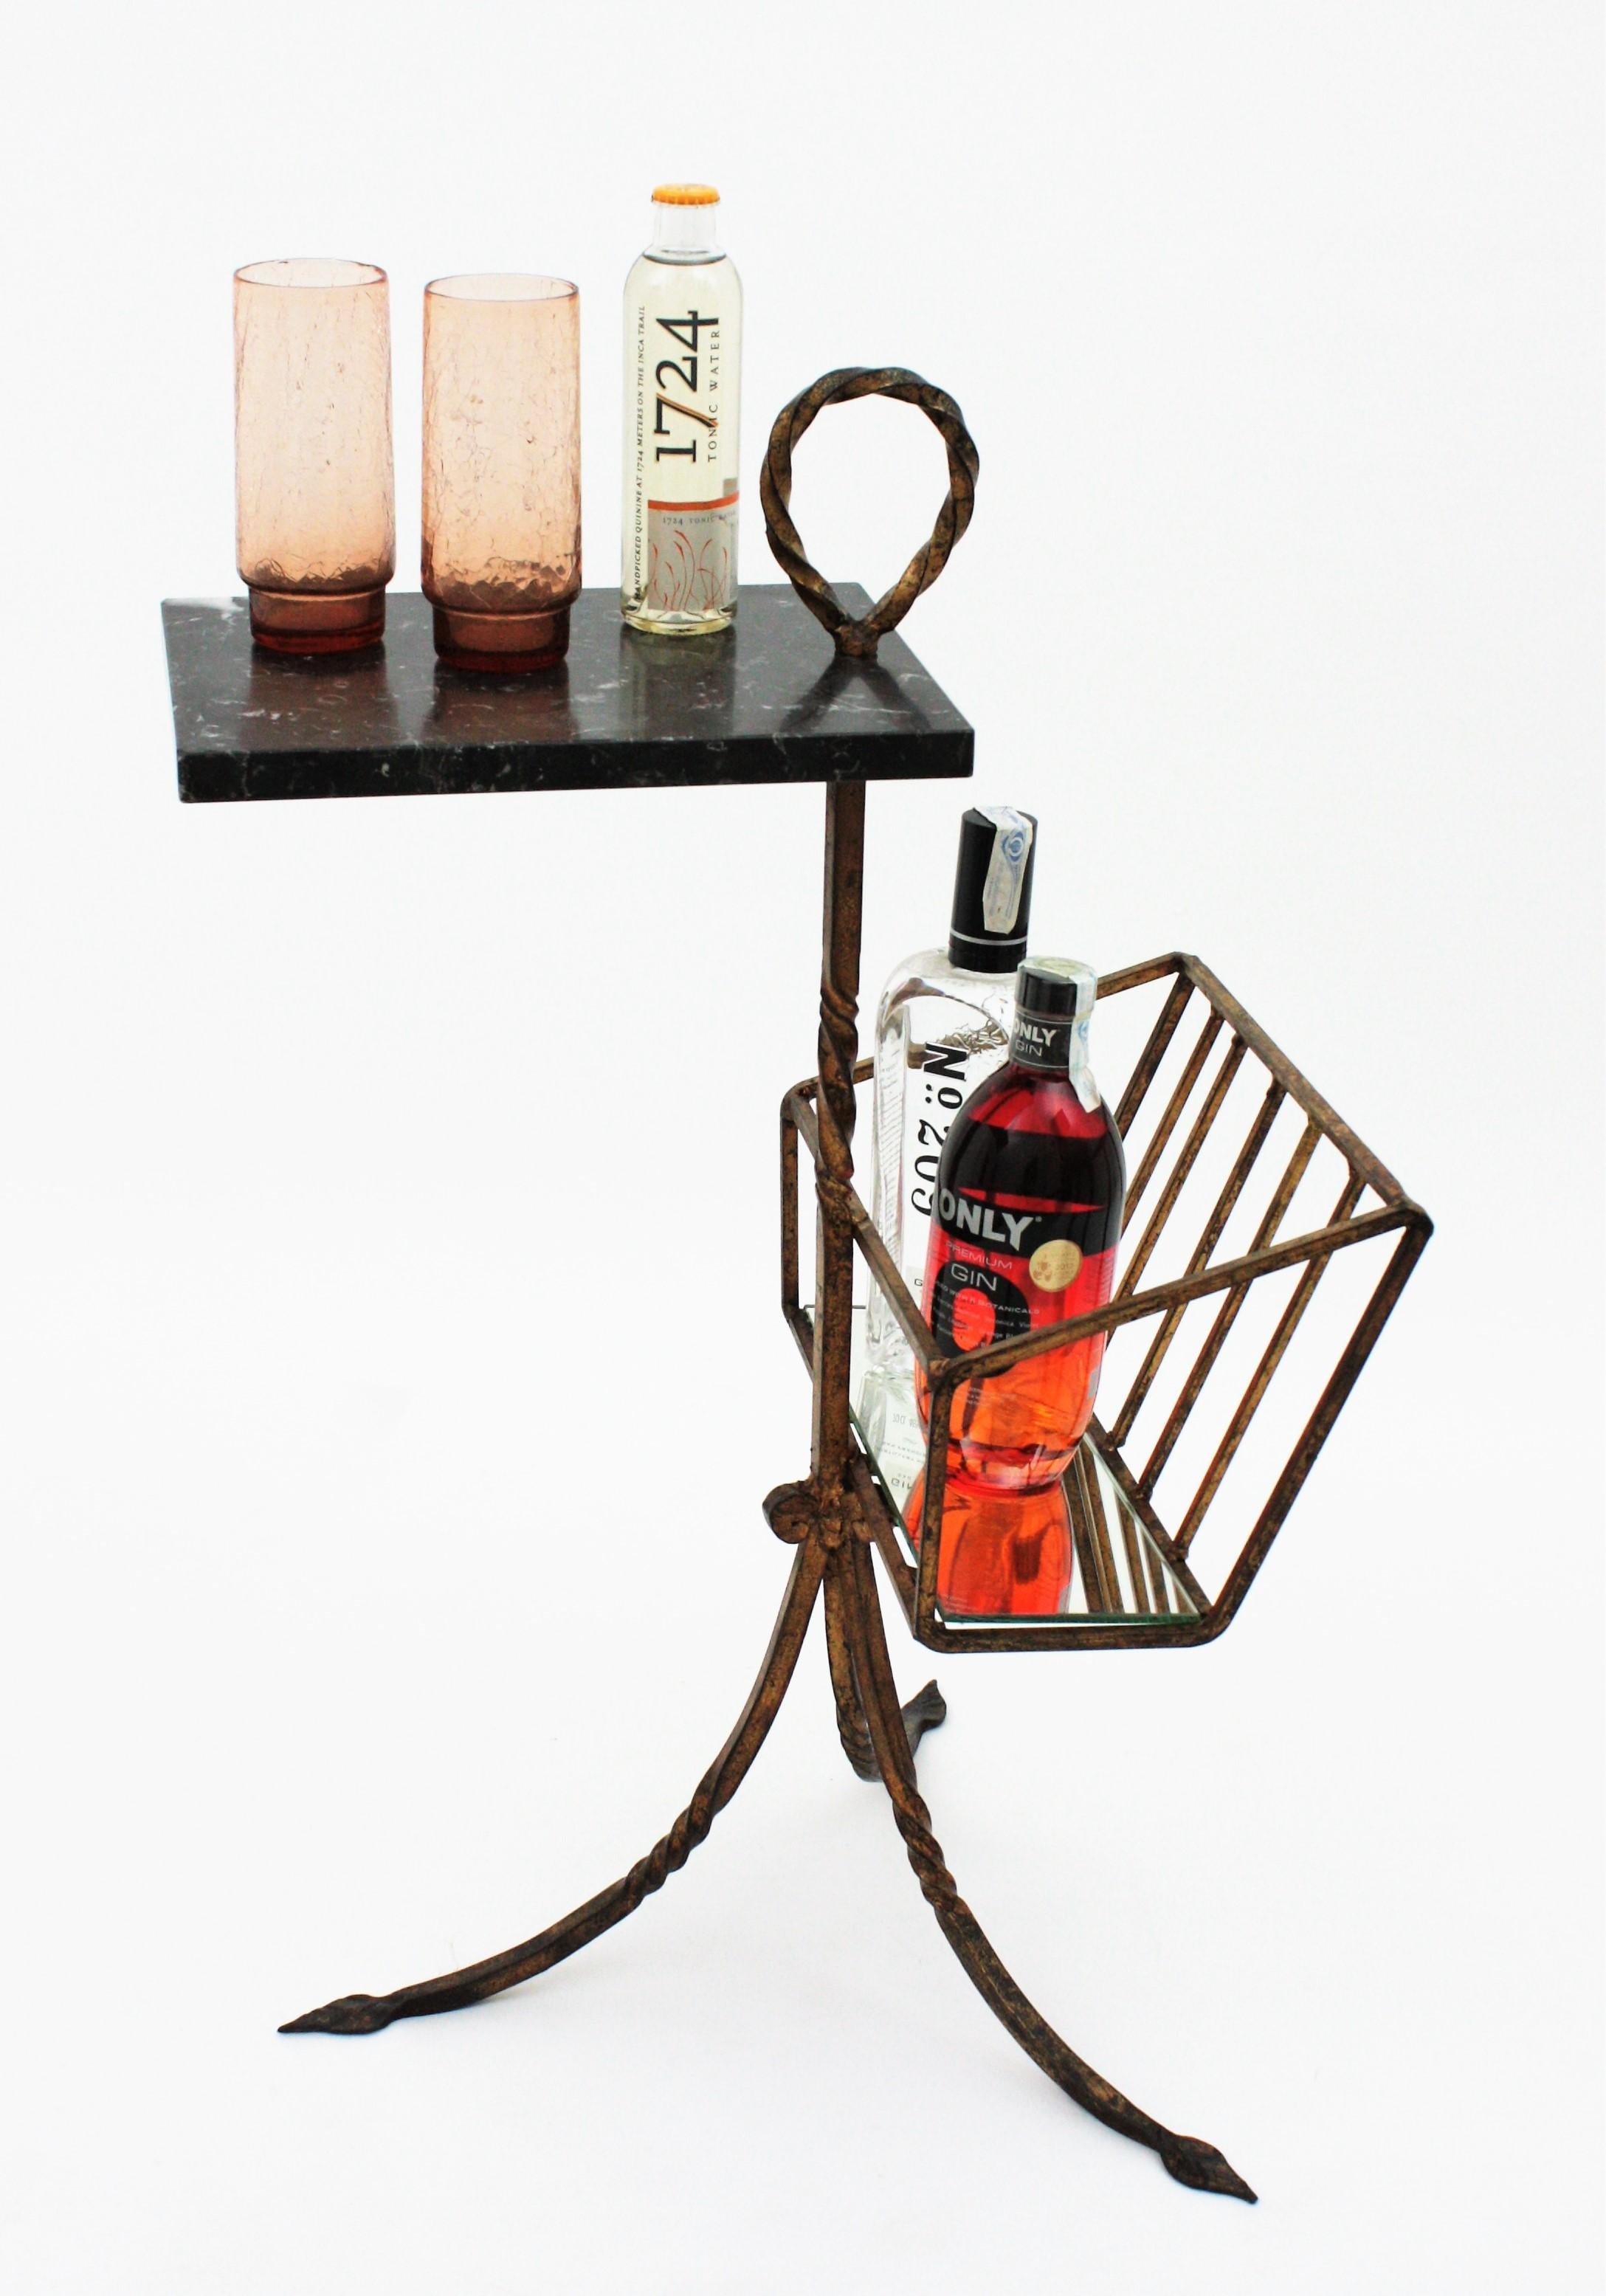 One of a kind gilt iron and black marble end table with magazine holder or drinks Stand. Spain, 1940s
This stylish hand forged iron table features a black marble tabletop standing on a git iron structure with a tripod base. The marble top has a